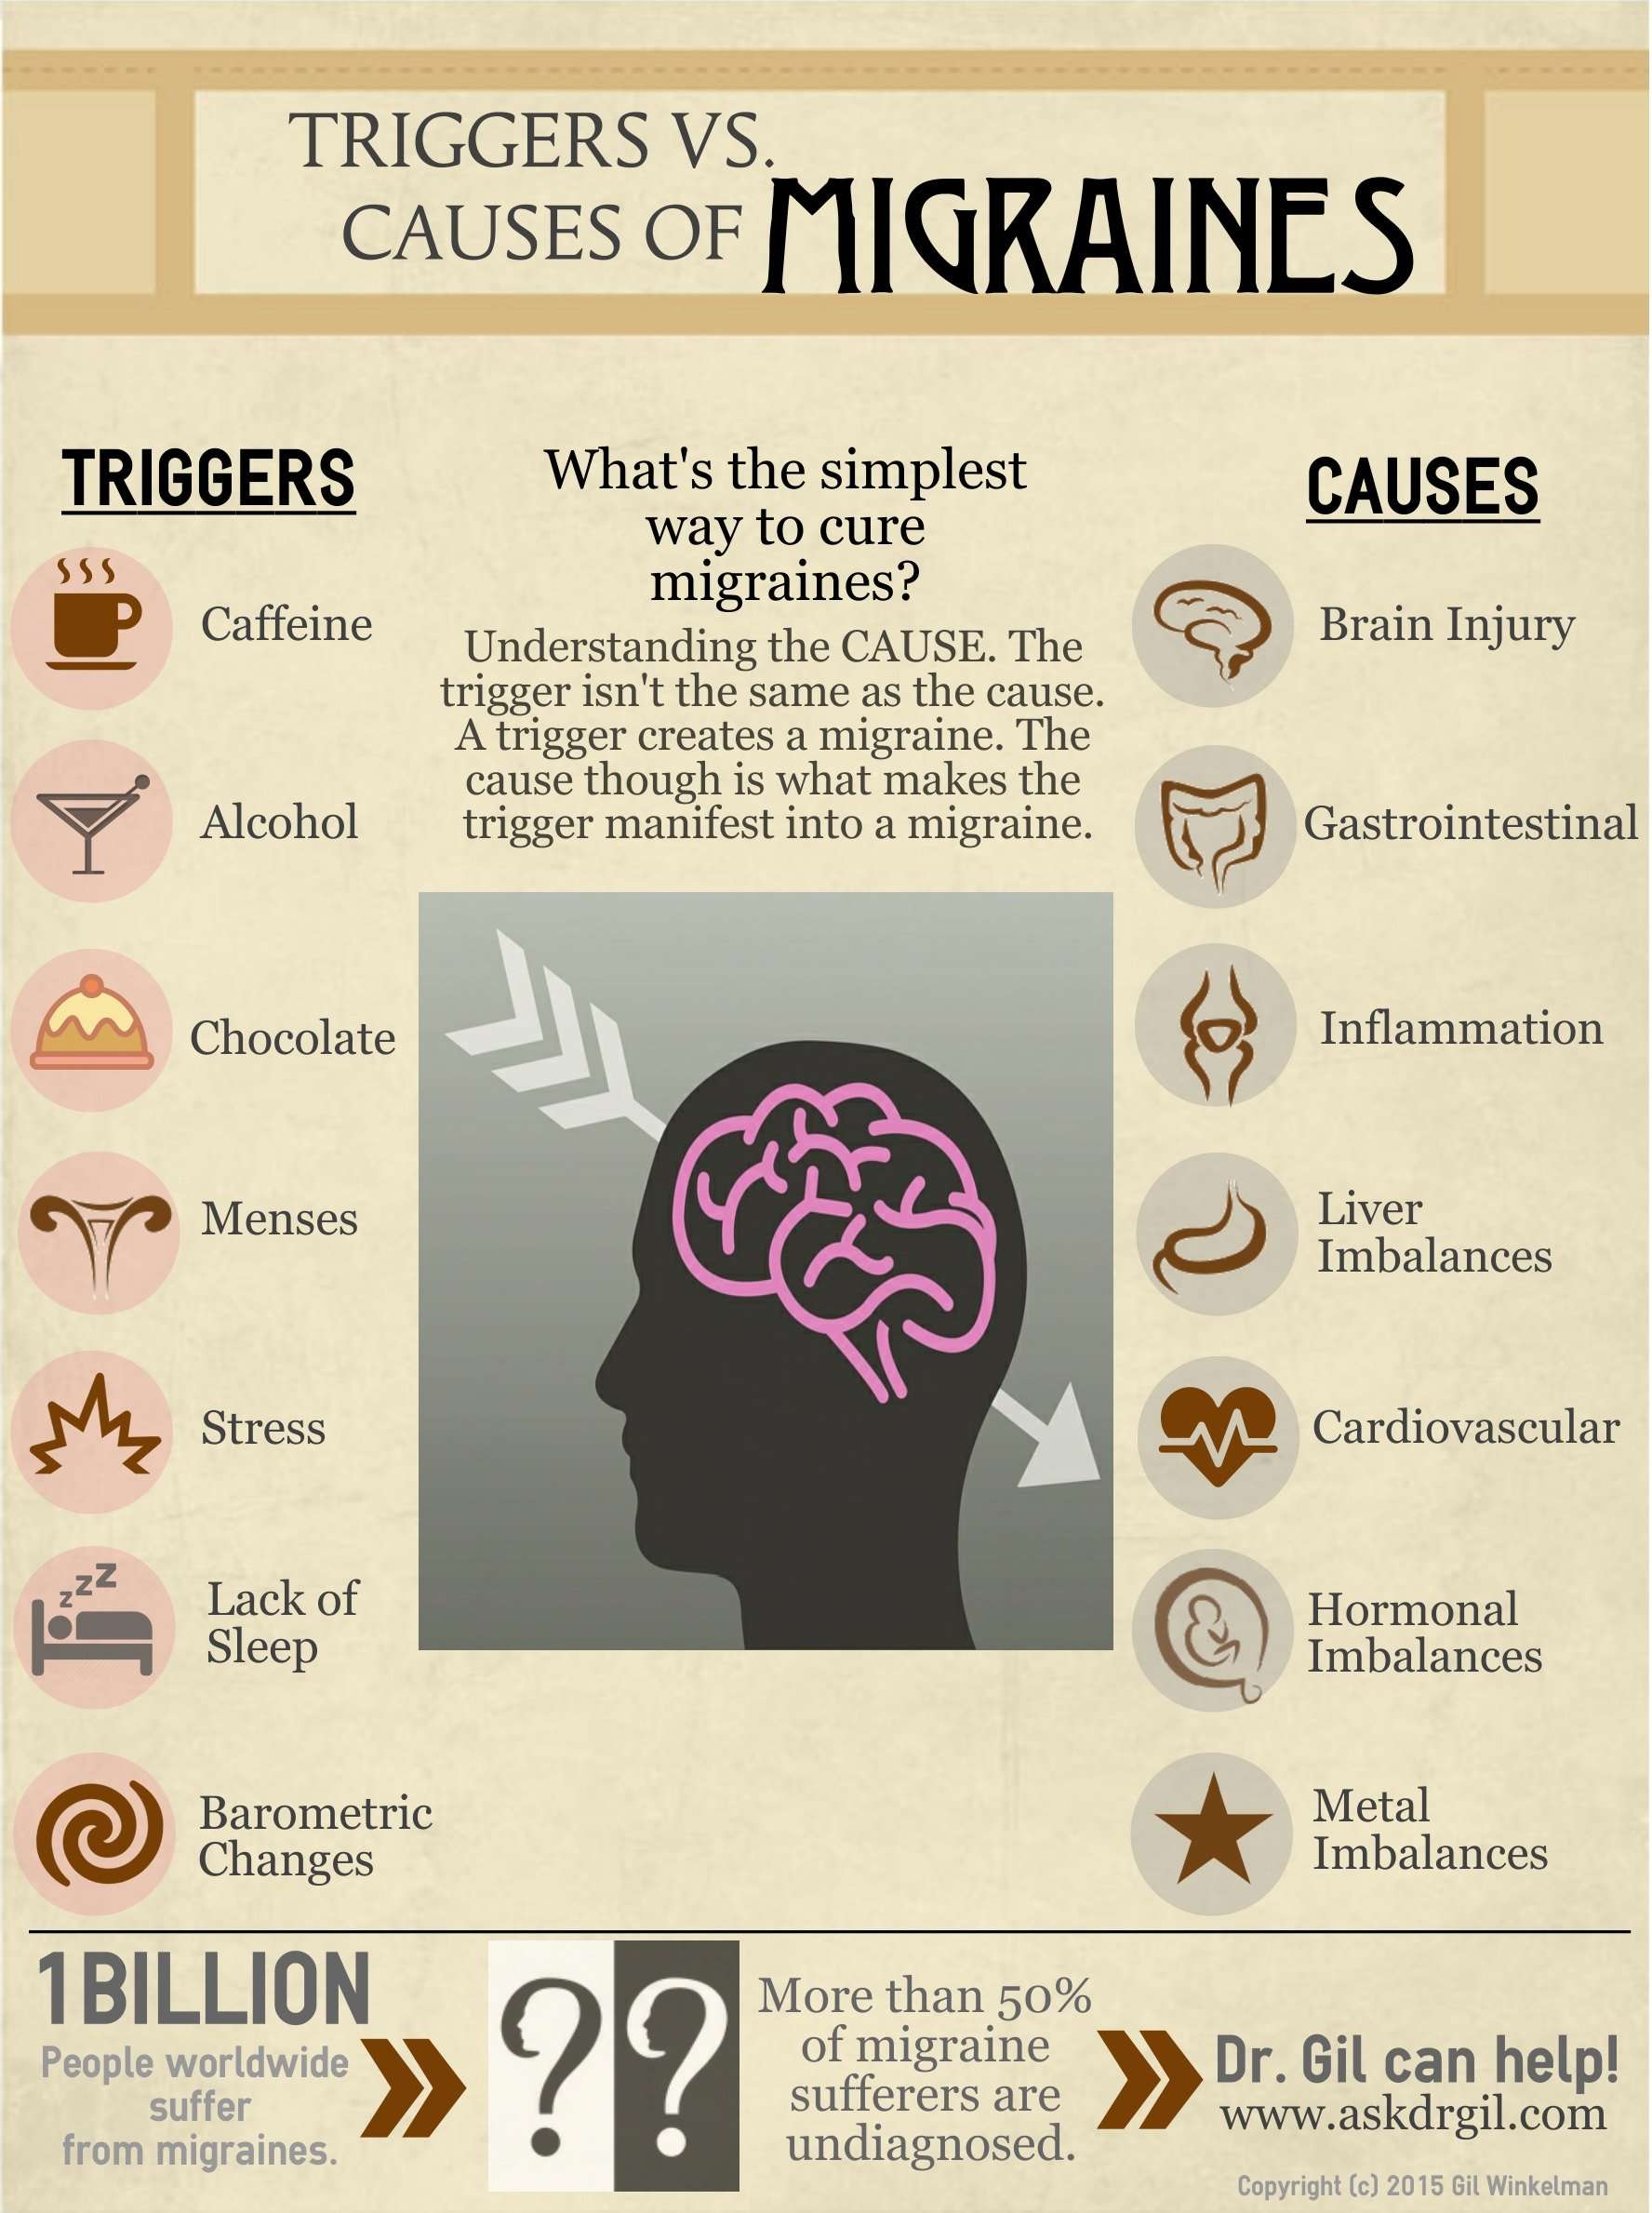 Handy Charts to Help Deal with Migraines